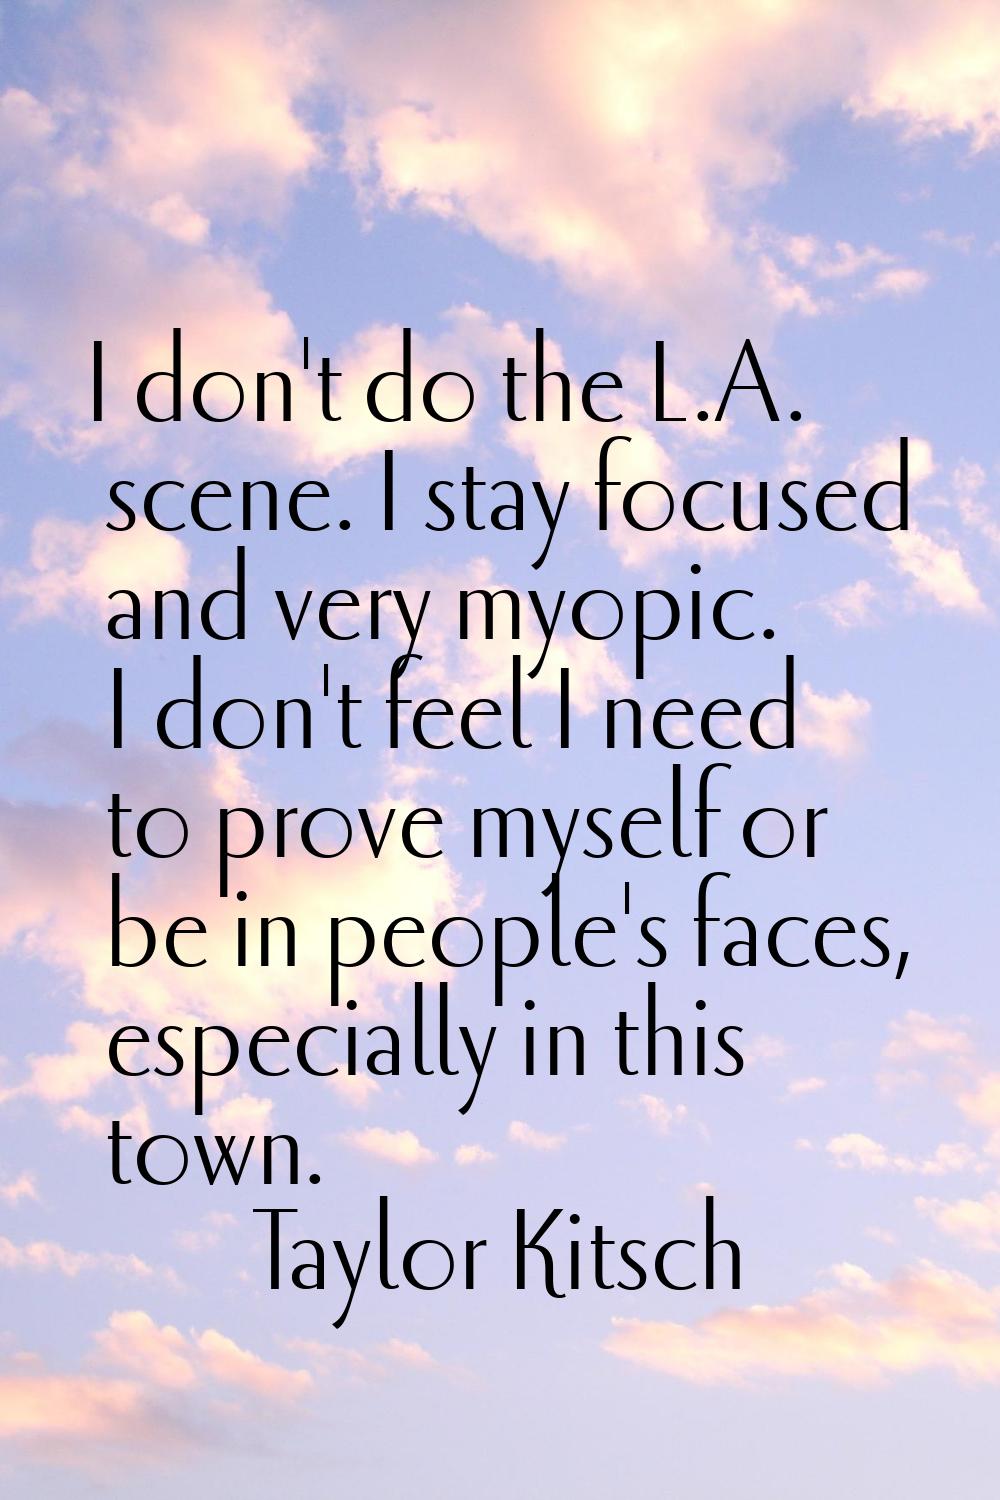 I don't do the L.A. scene. I stay focused and very myopic. I don't feel I need to prove myself or b